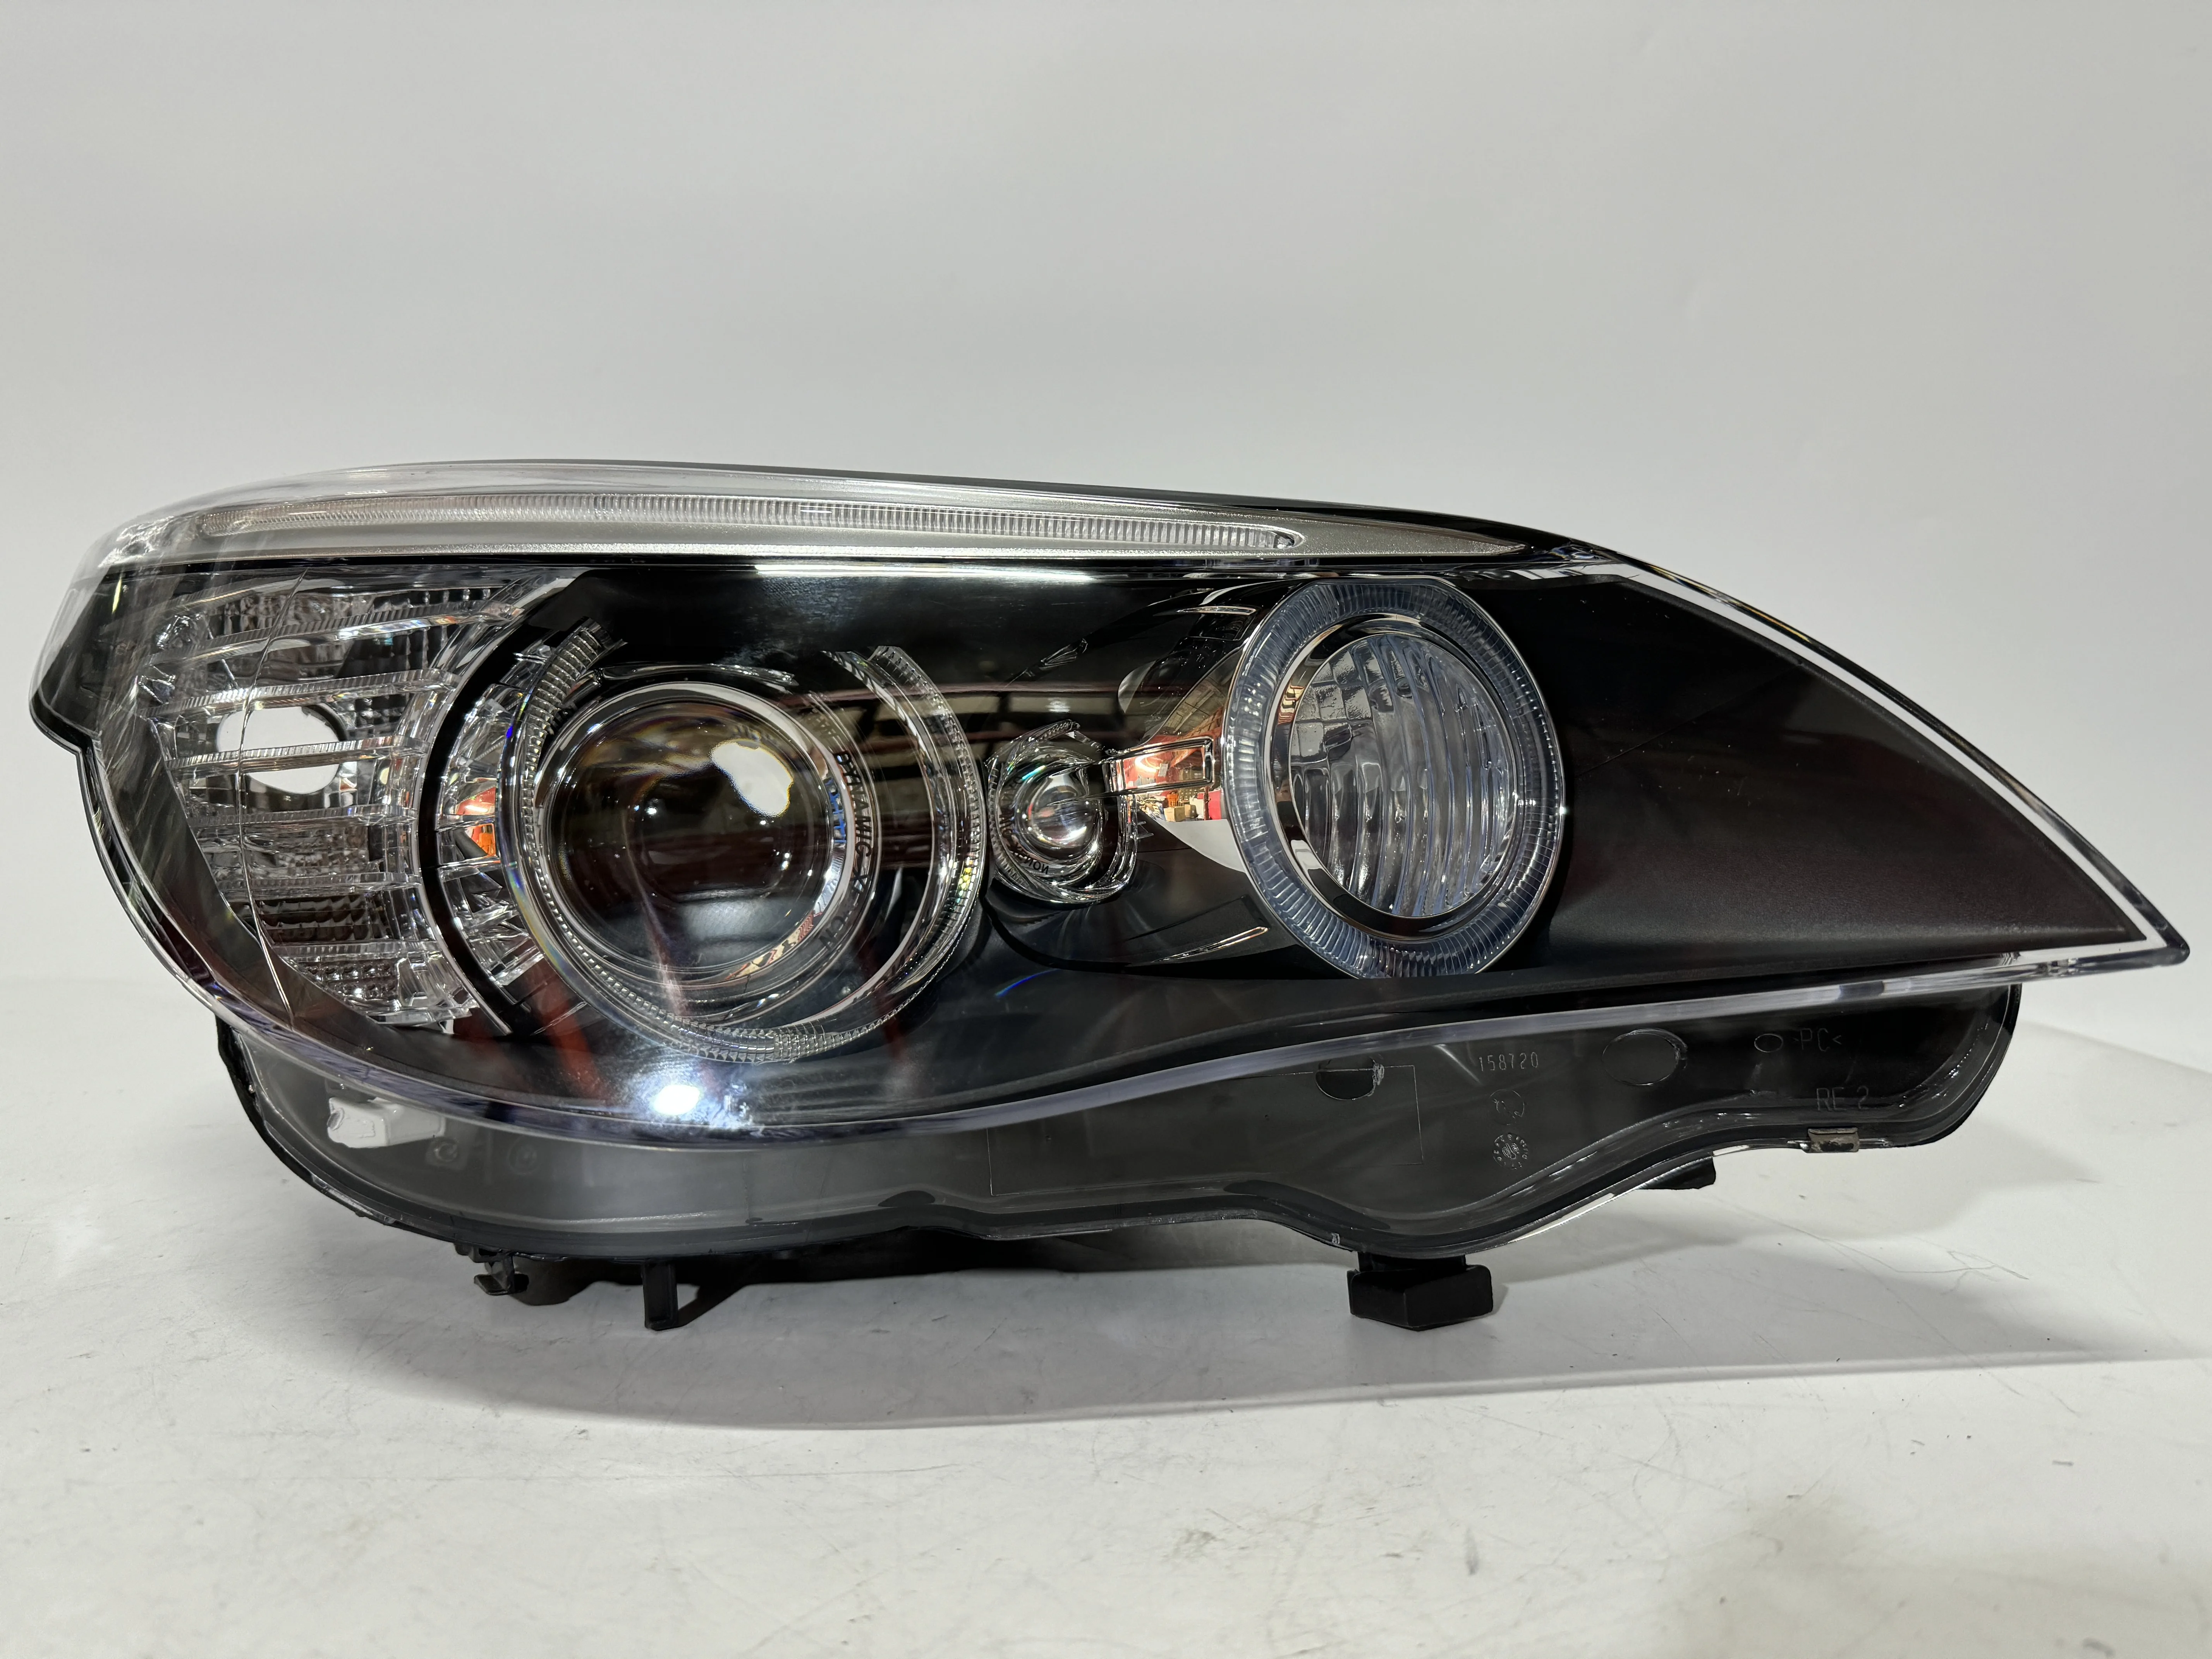 Fit For BMW 5 Headlight 2008-2010 BMW E60 Headlight Xenon Headlamps AFS And Without AFS Plug And Play Upgrade And Modification